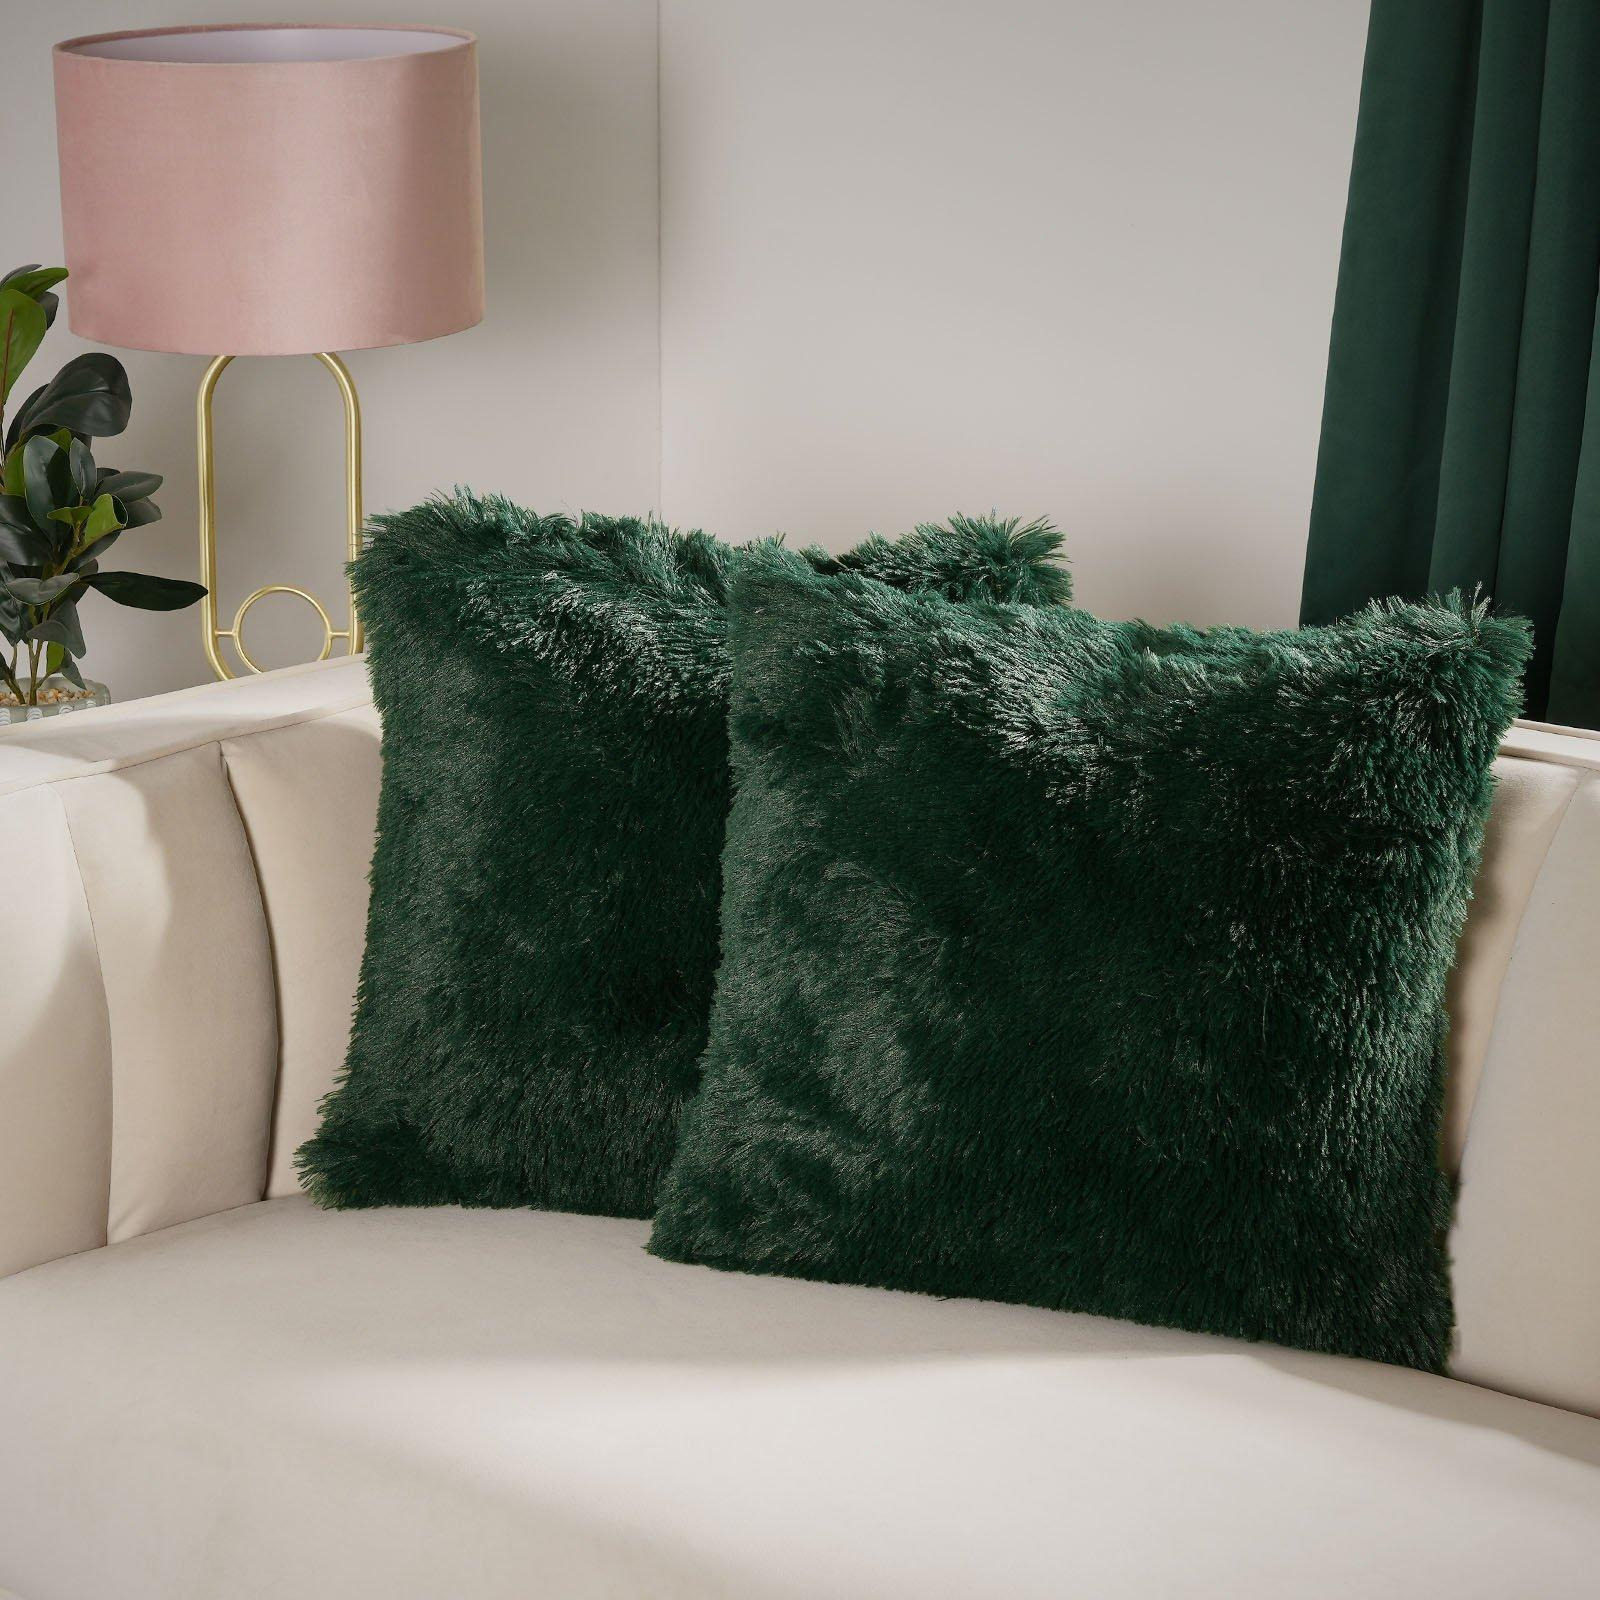 Set of 2 Fluffy Shaggy Filled Cushion with Cover Square - image 1